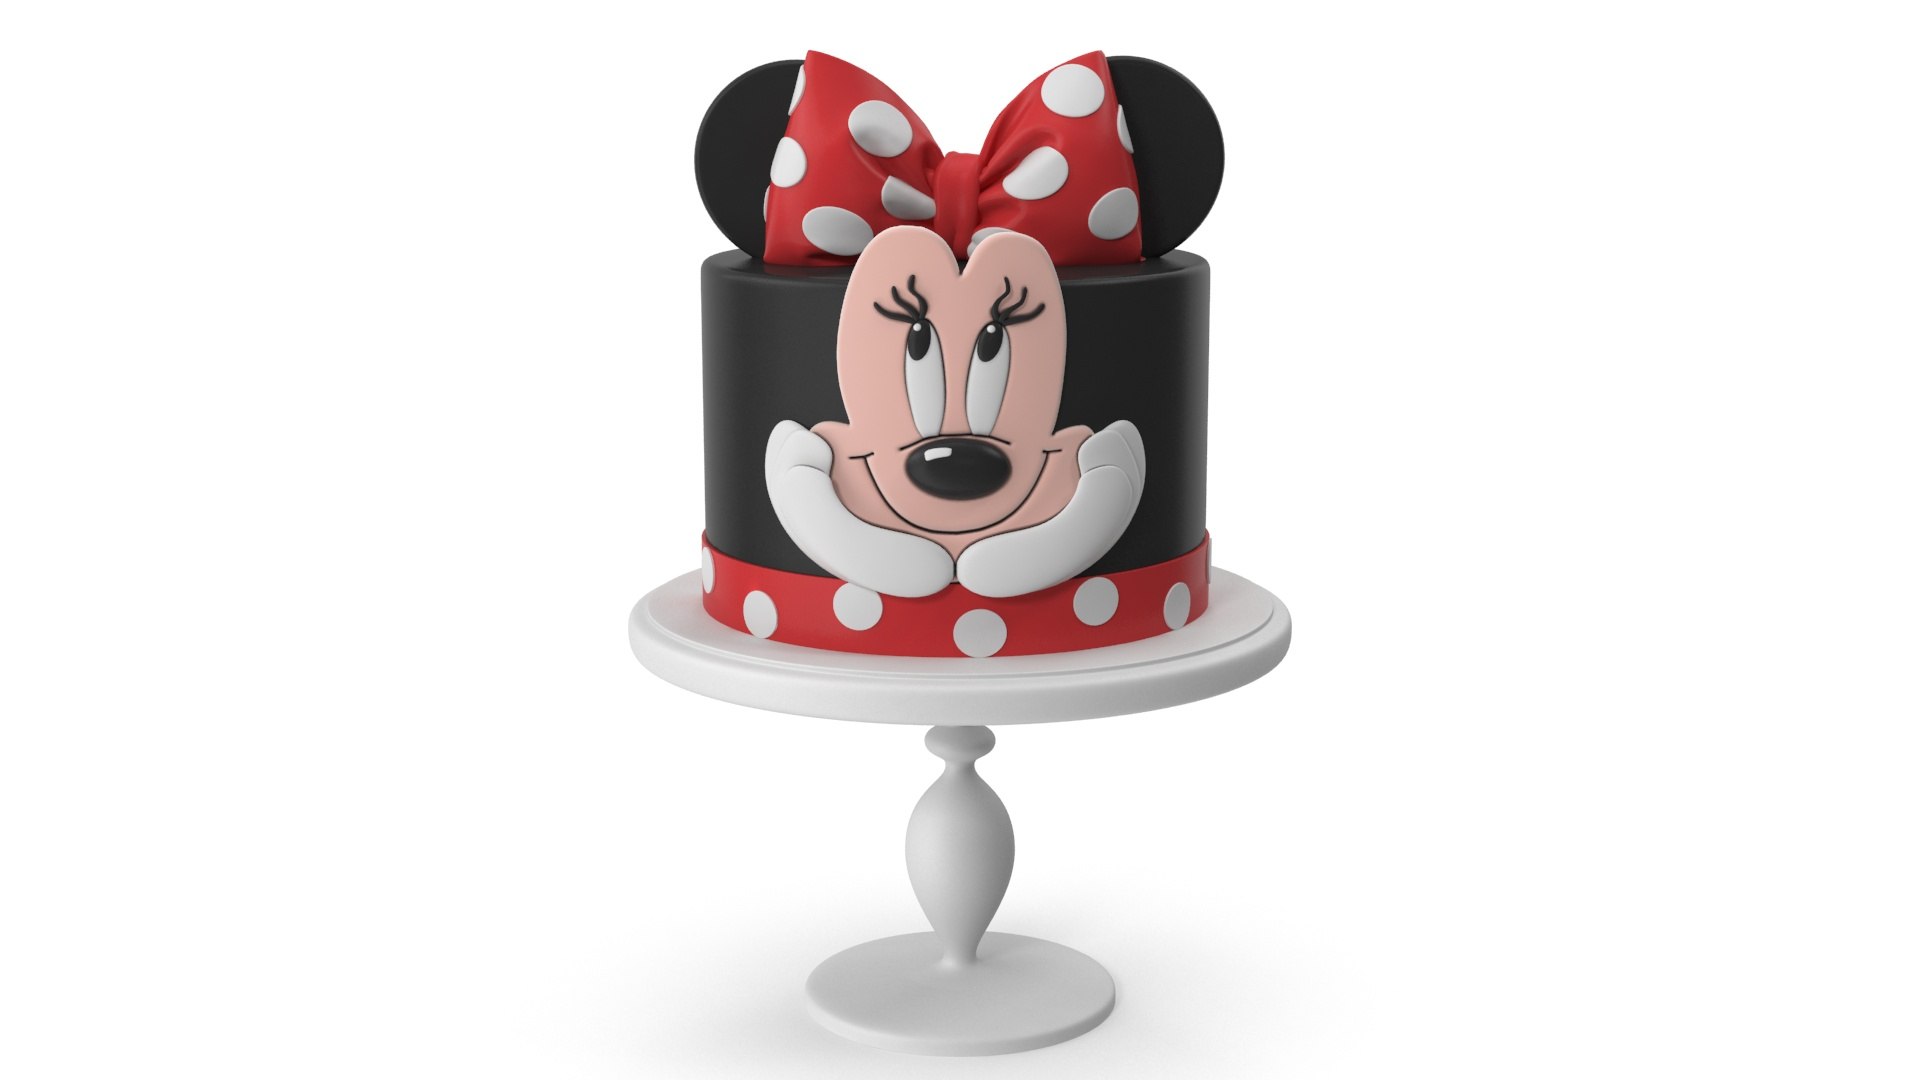 Any Color: 3D Roblox Cake Topper Birthday Cake Topper / -  Portugal